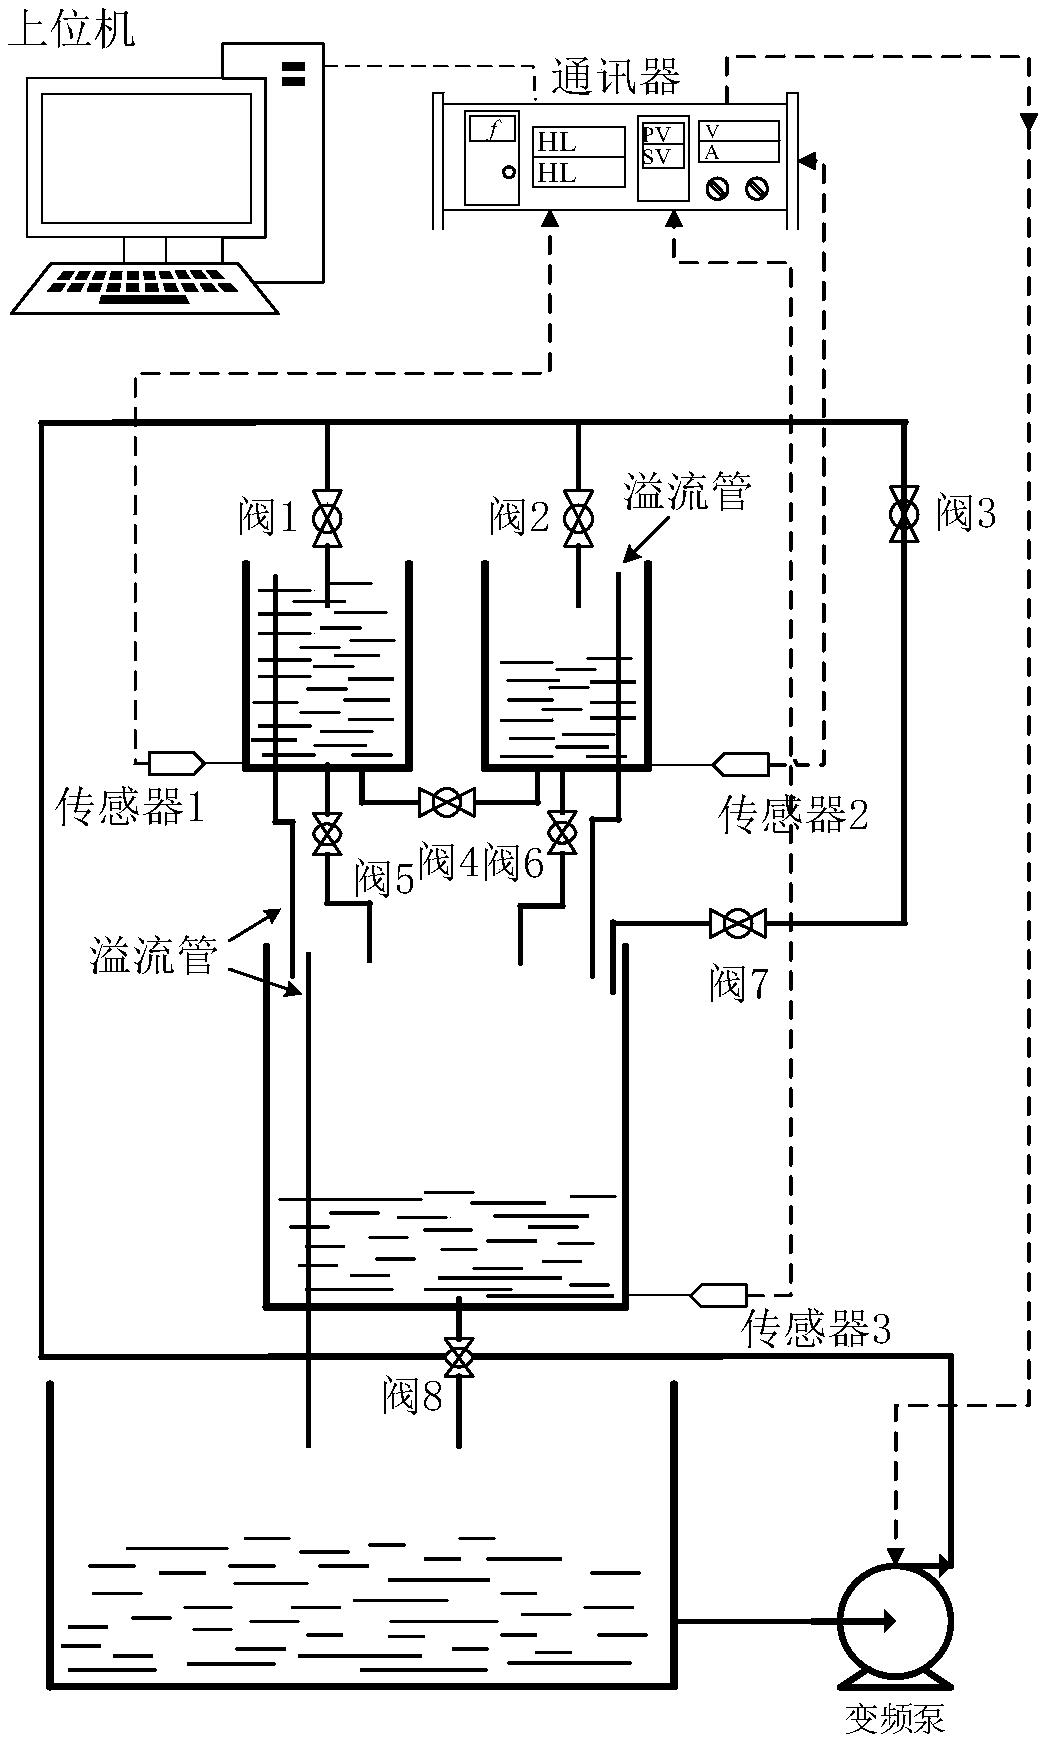 Novel active-disturbance-rejection controller with embedded model